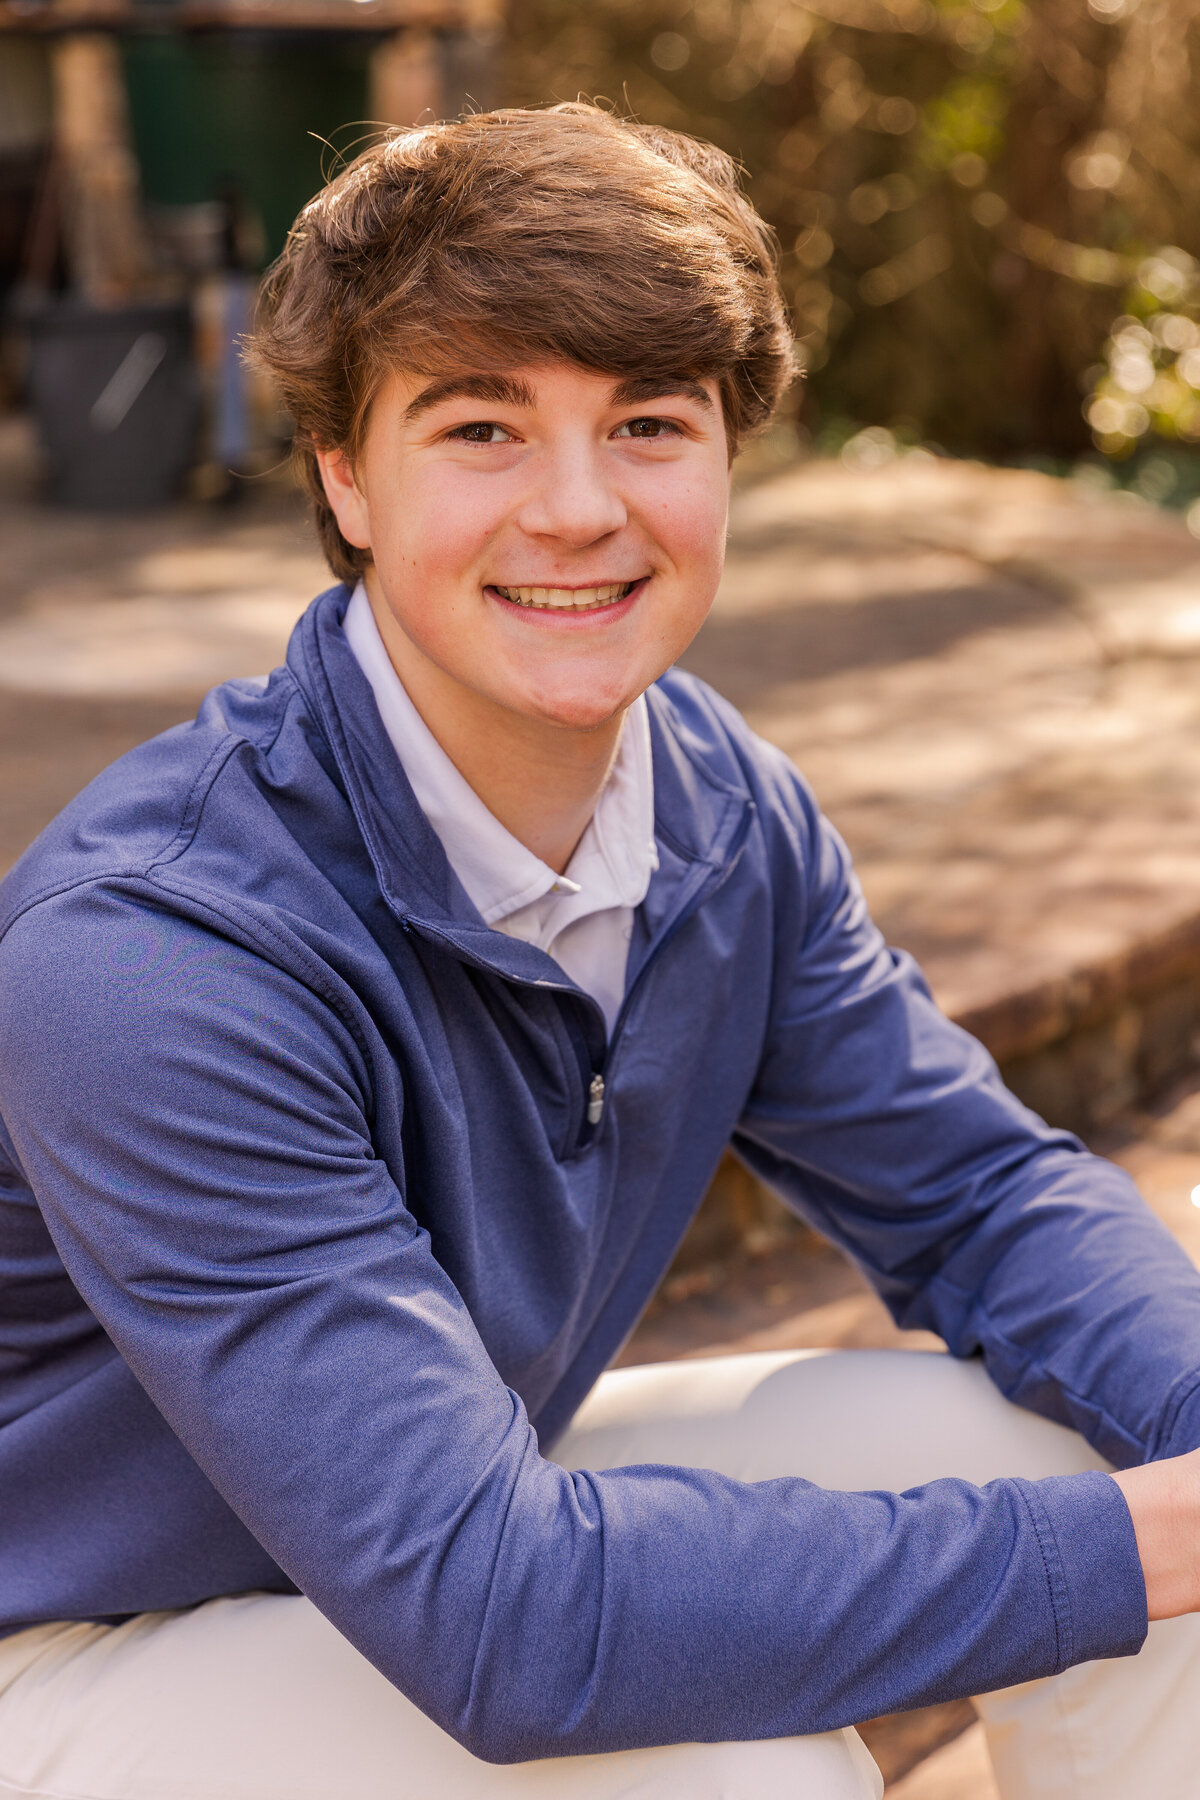 High school senior boy wearing white shirt and blue sweater sitting on stairs during Atlanta fall photoshoot Laure Photography